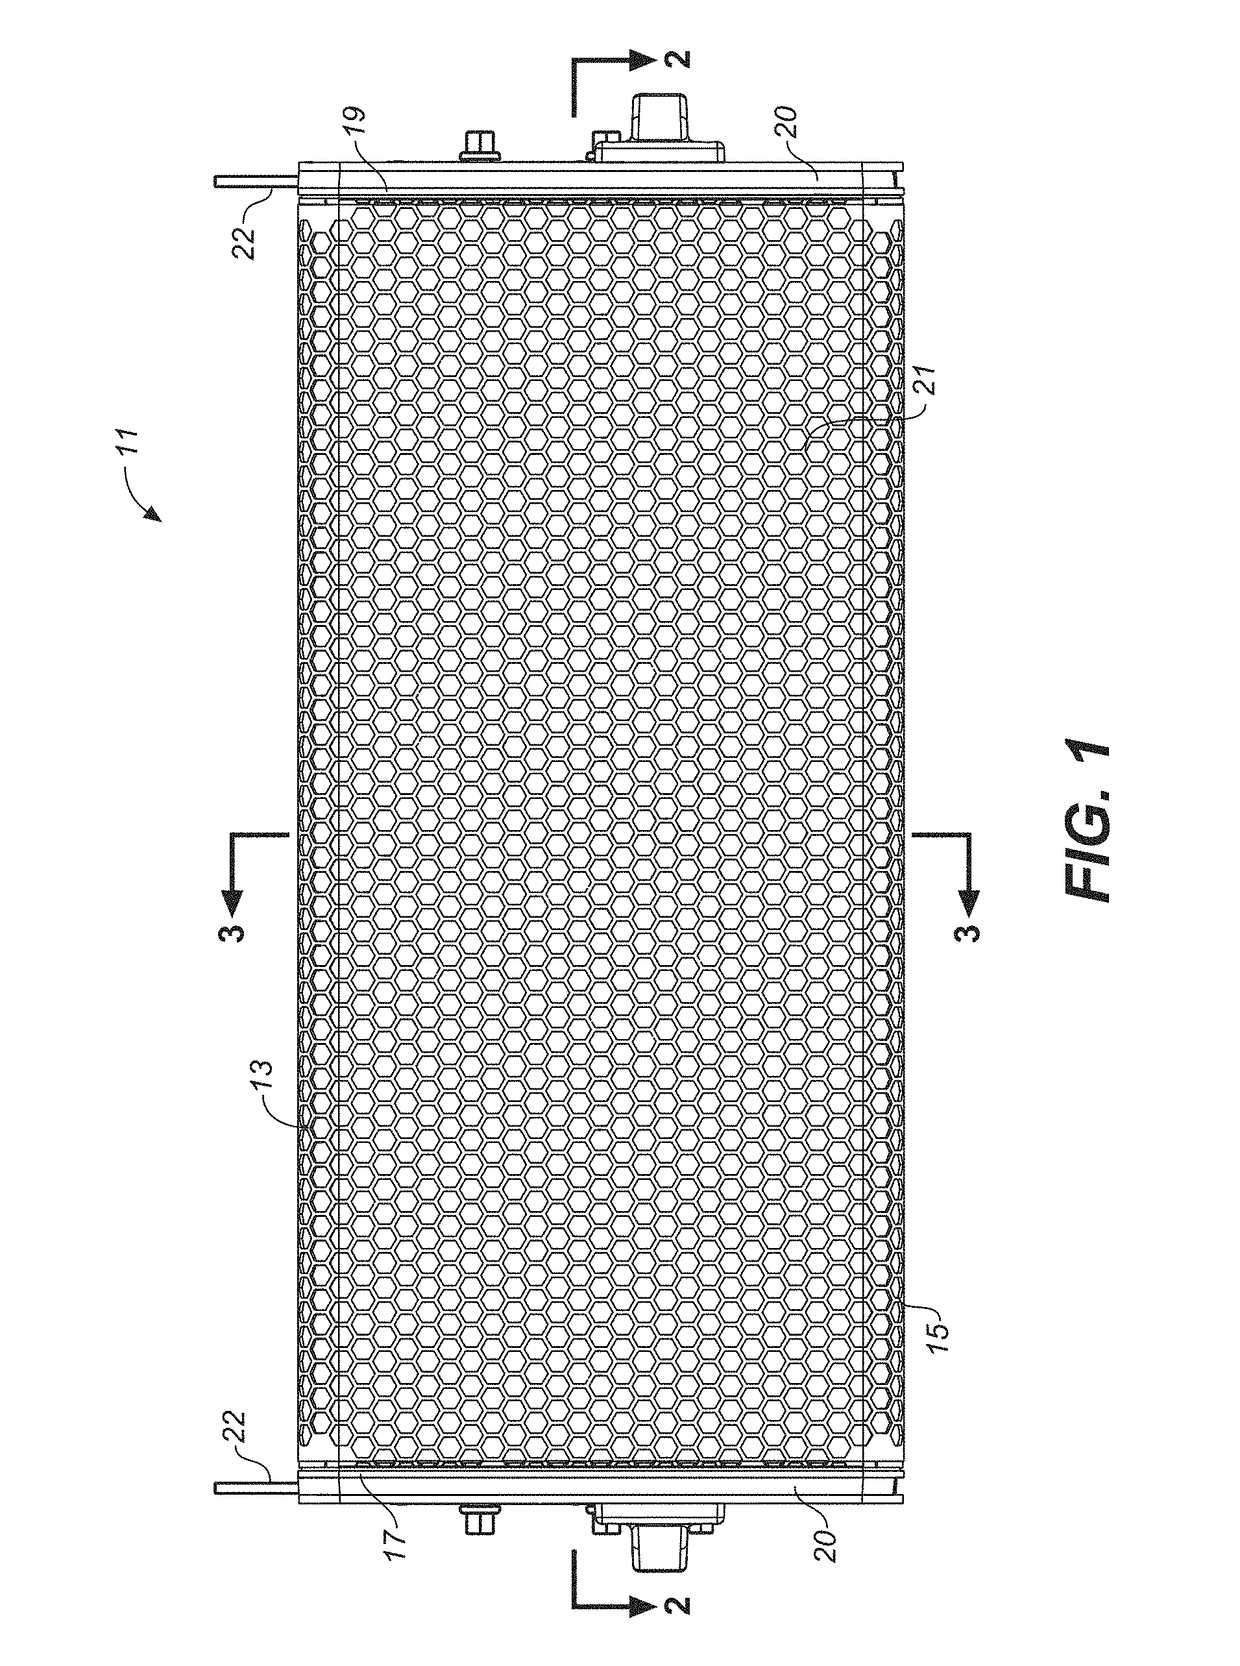 Arrayable loudspeaker with constant wide beamwidth